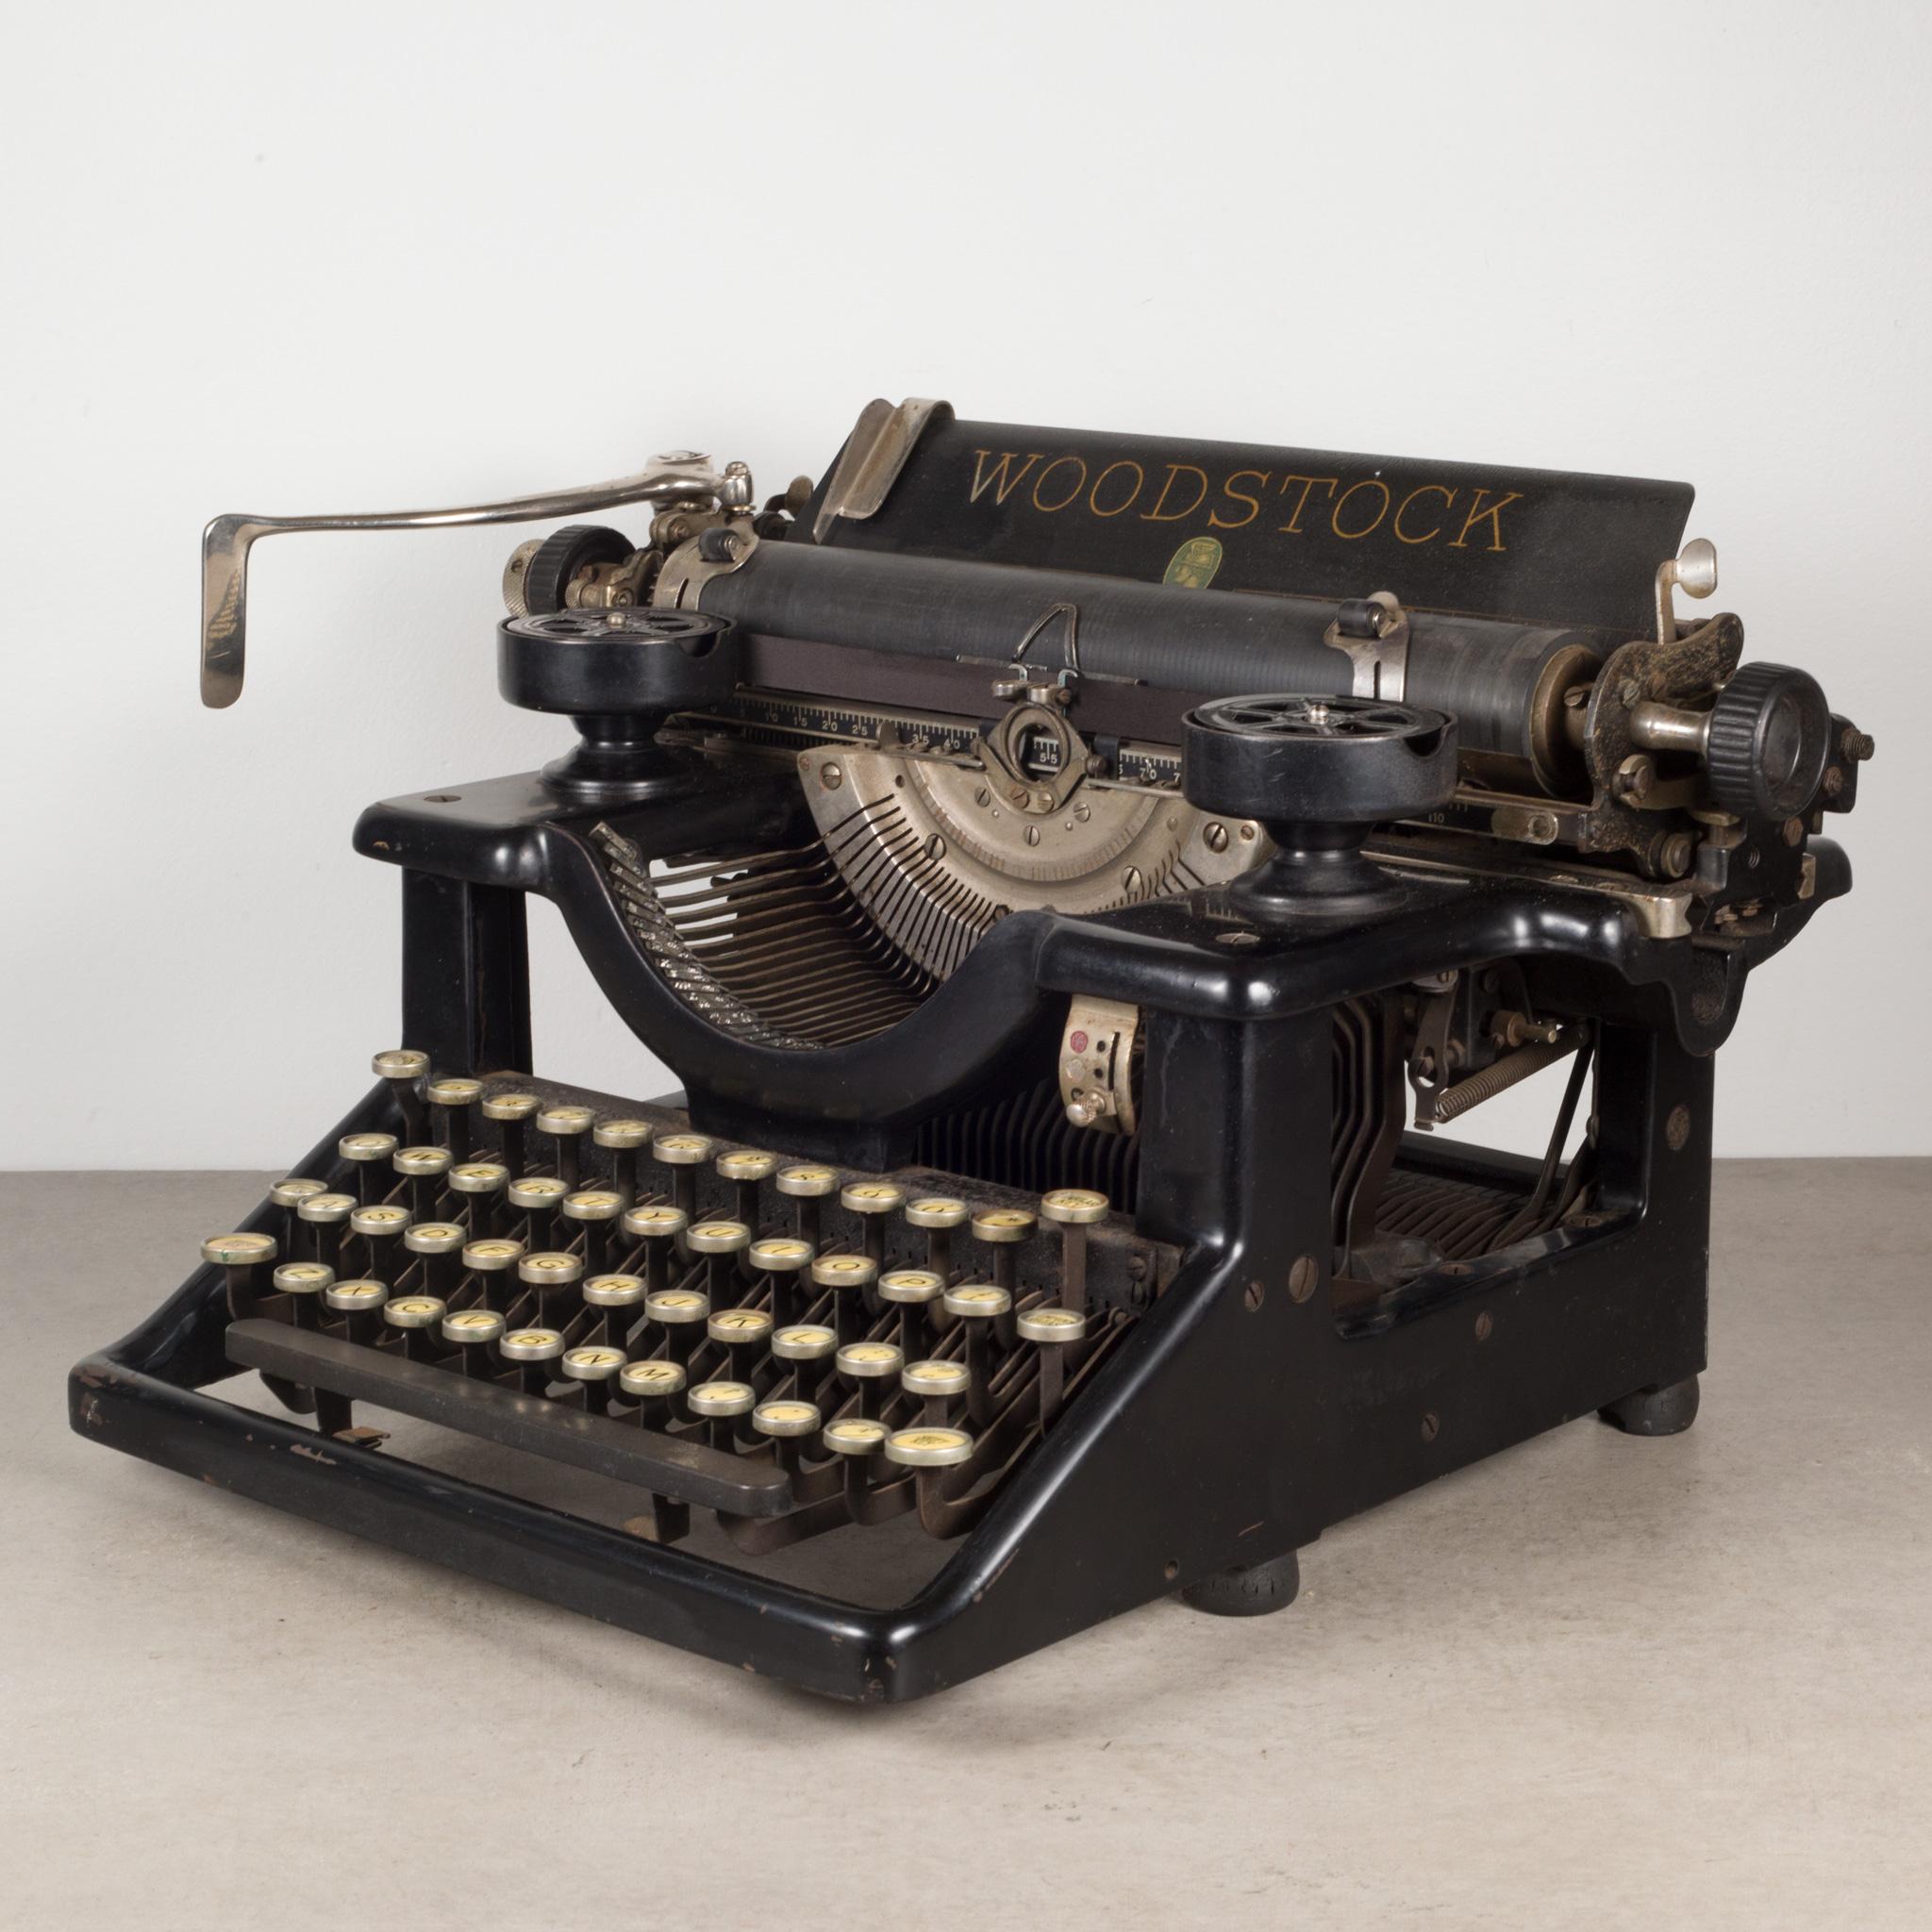 About

An original refurbished Woodstock Model 5N typewriter with yellow and black nickle keys. It has smooth typing and the carriage advances and functions very well.

Creator Woodstock Typewriter Company.
Date of manufacture